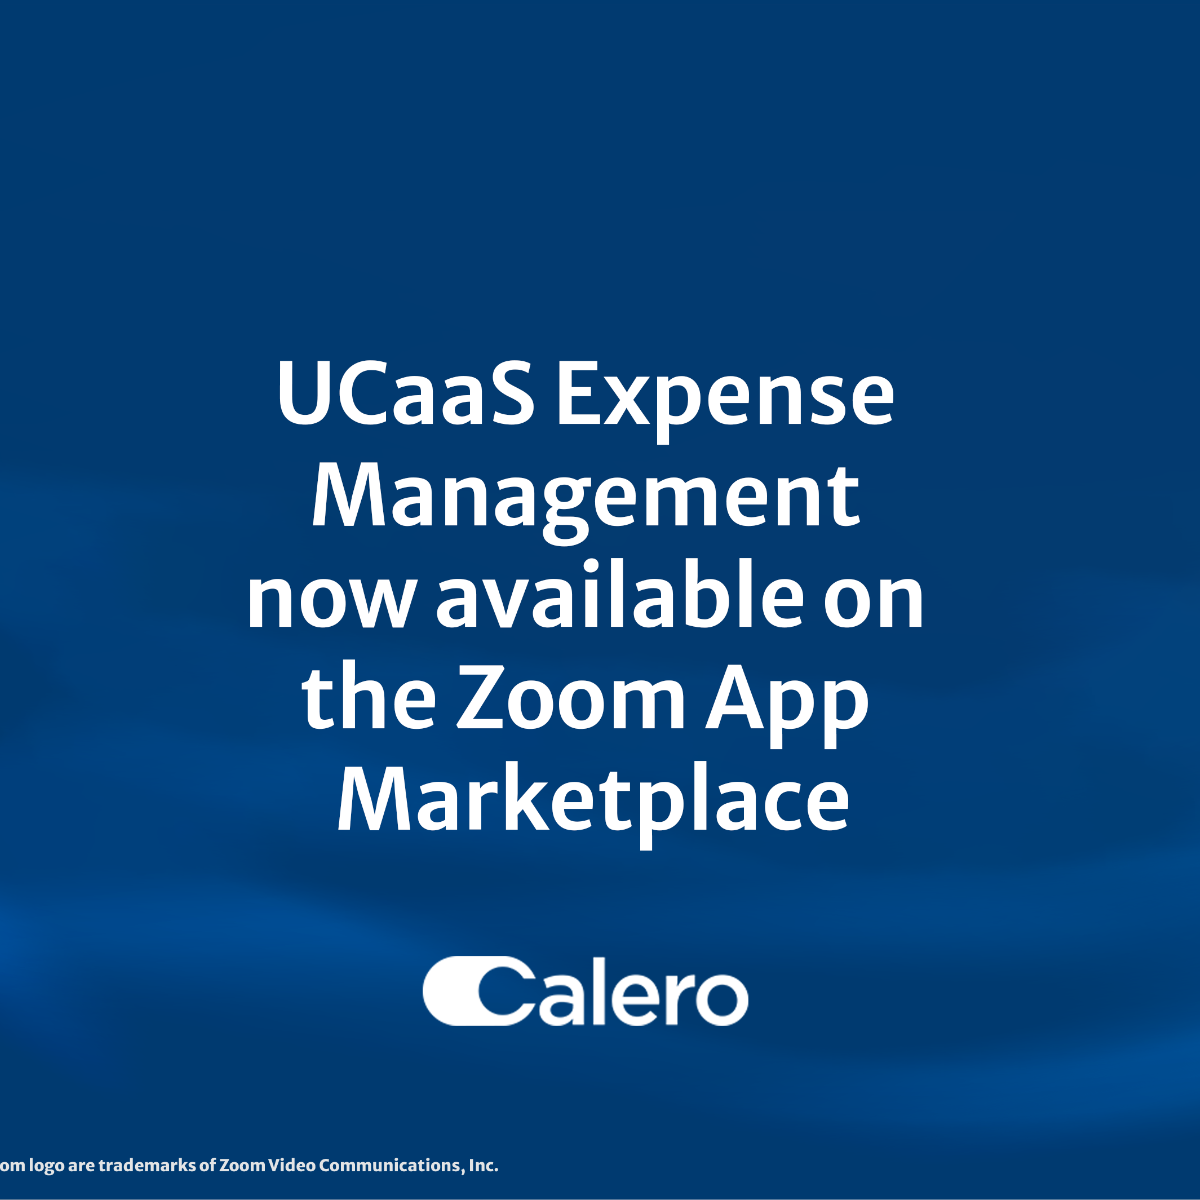 Calero Joins the Zoom App Marketplace to Solve Enterprise UCaaS Expense Management Challenges